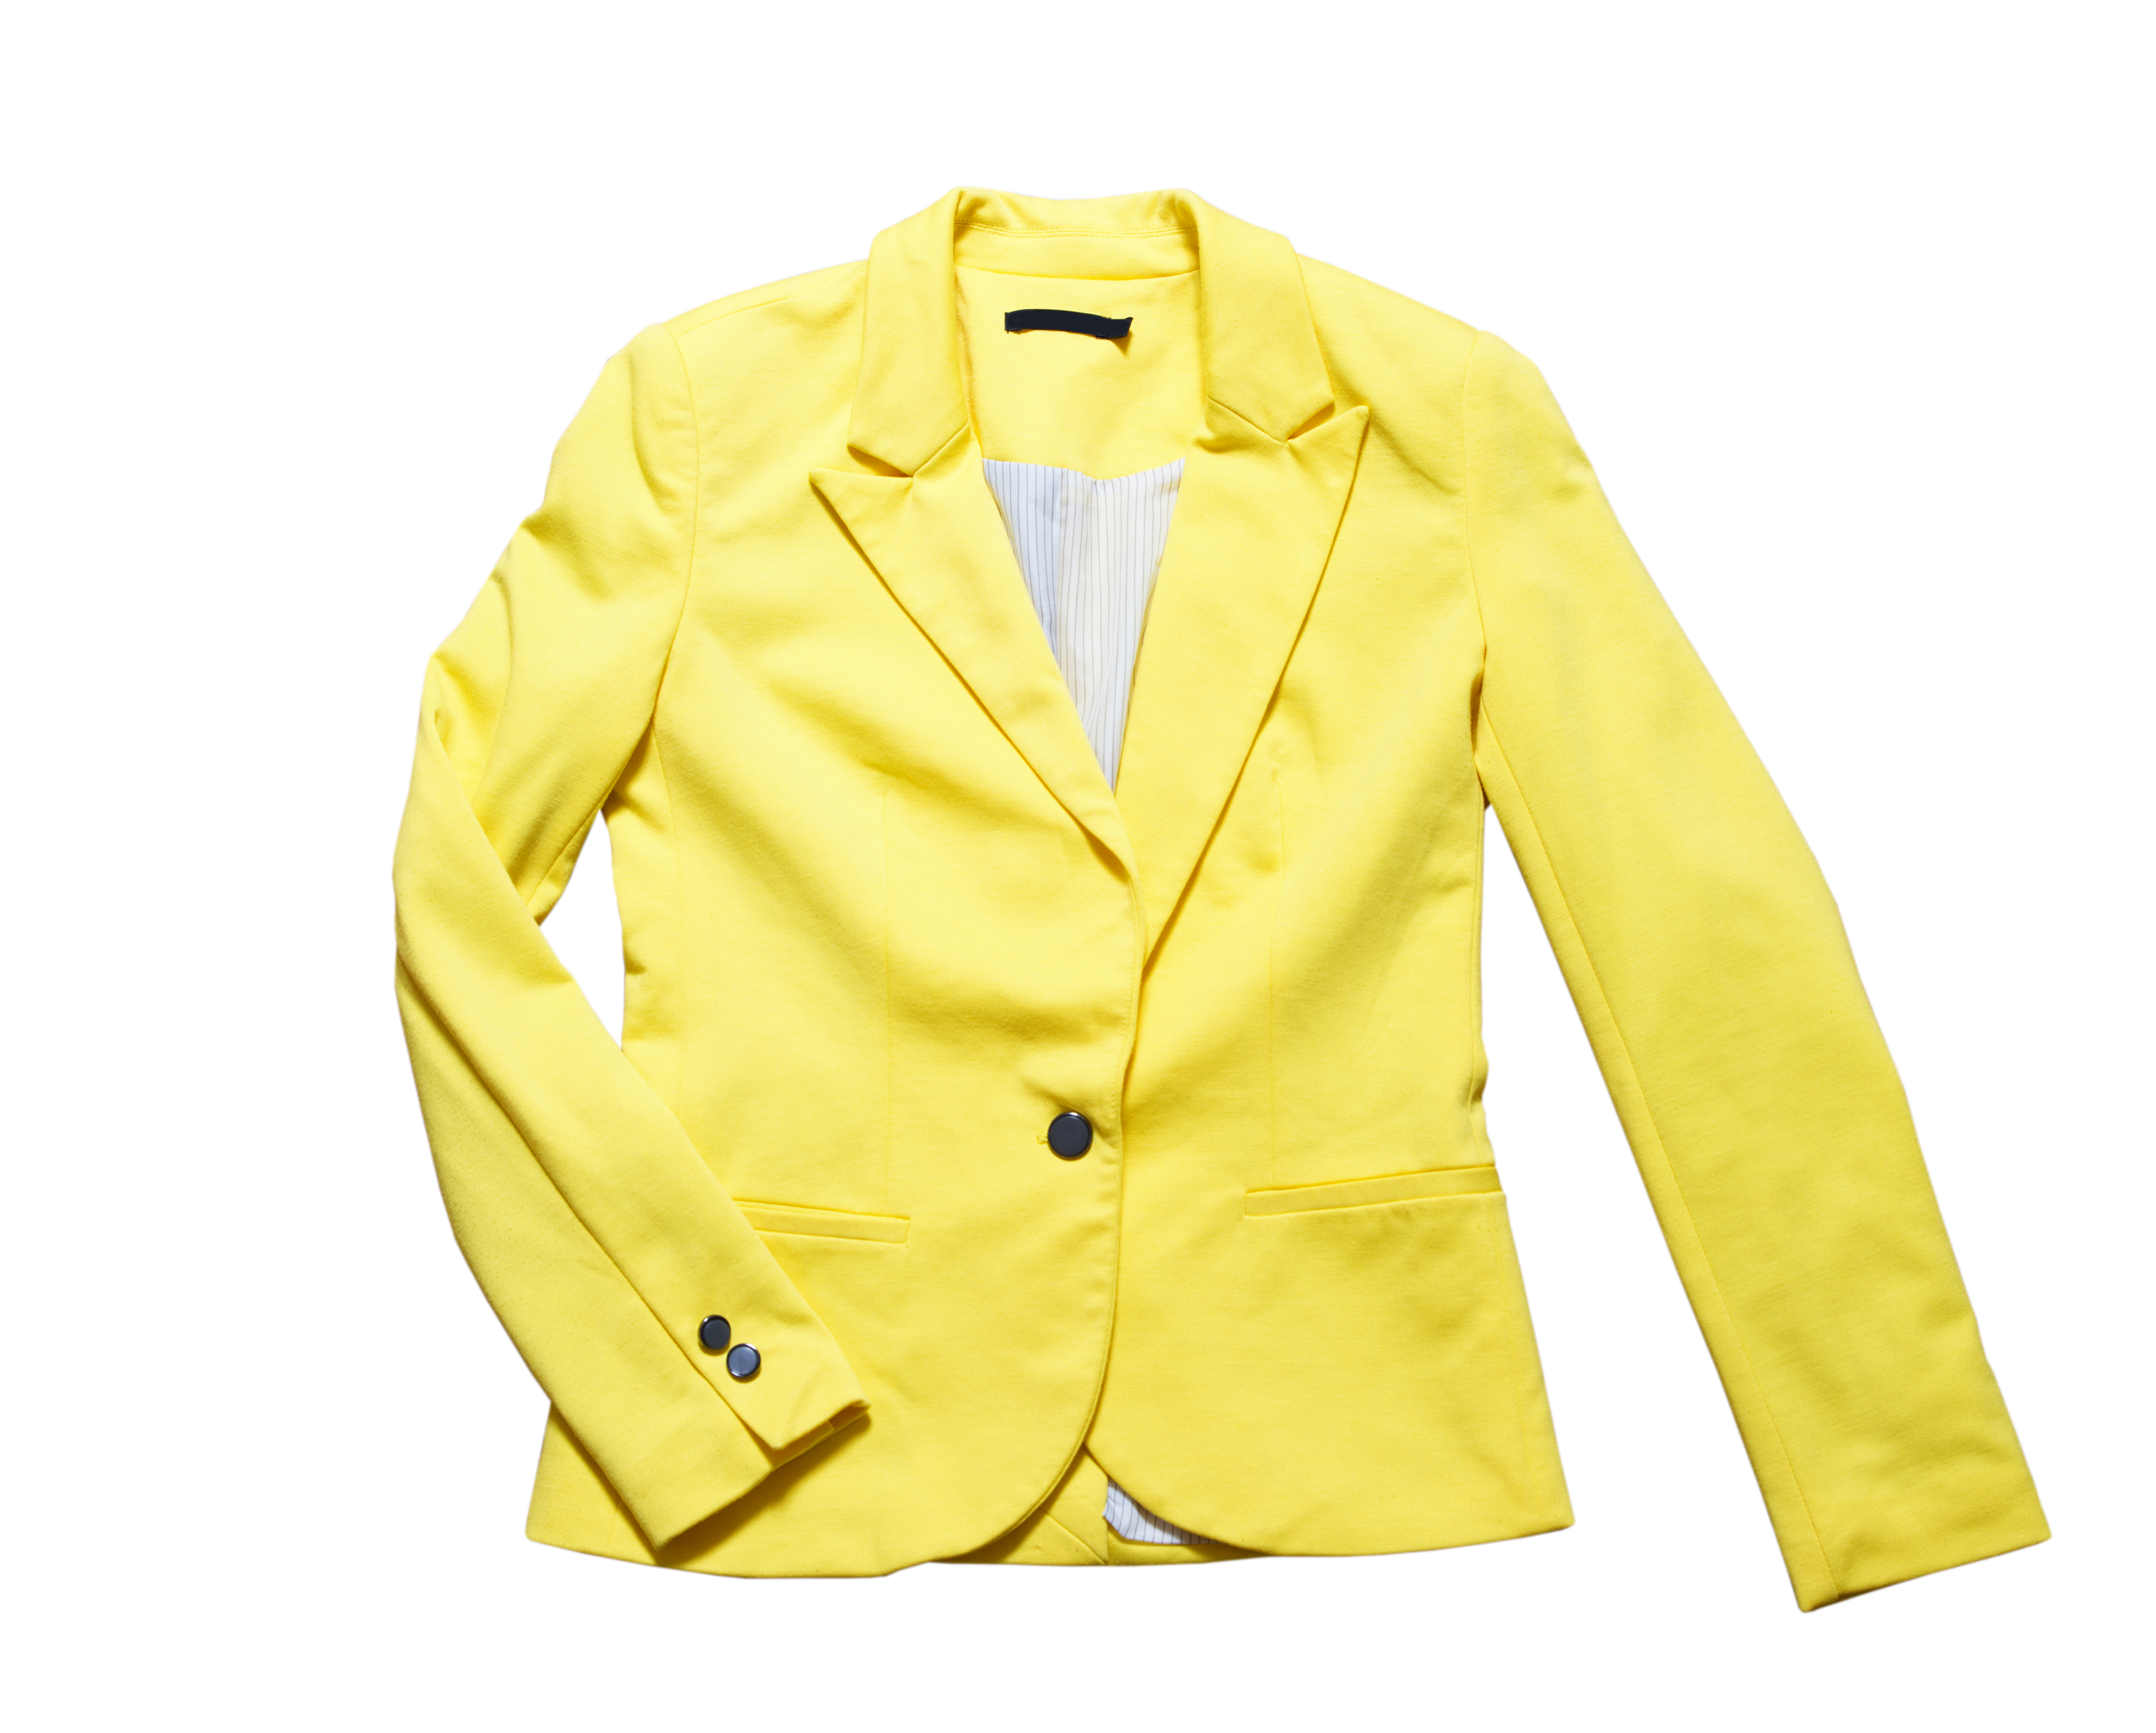 A classic yellow jacket | Source: Shutterstock